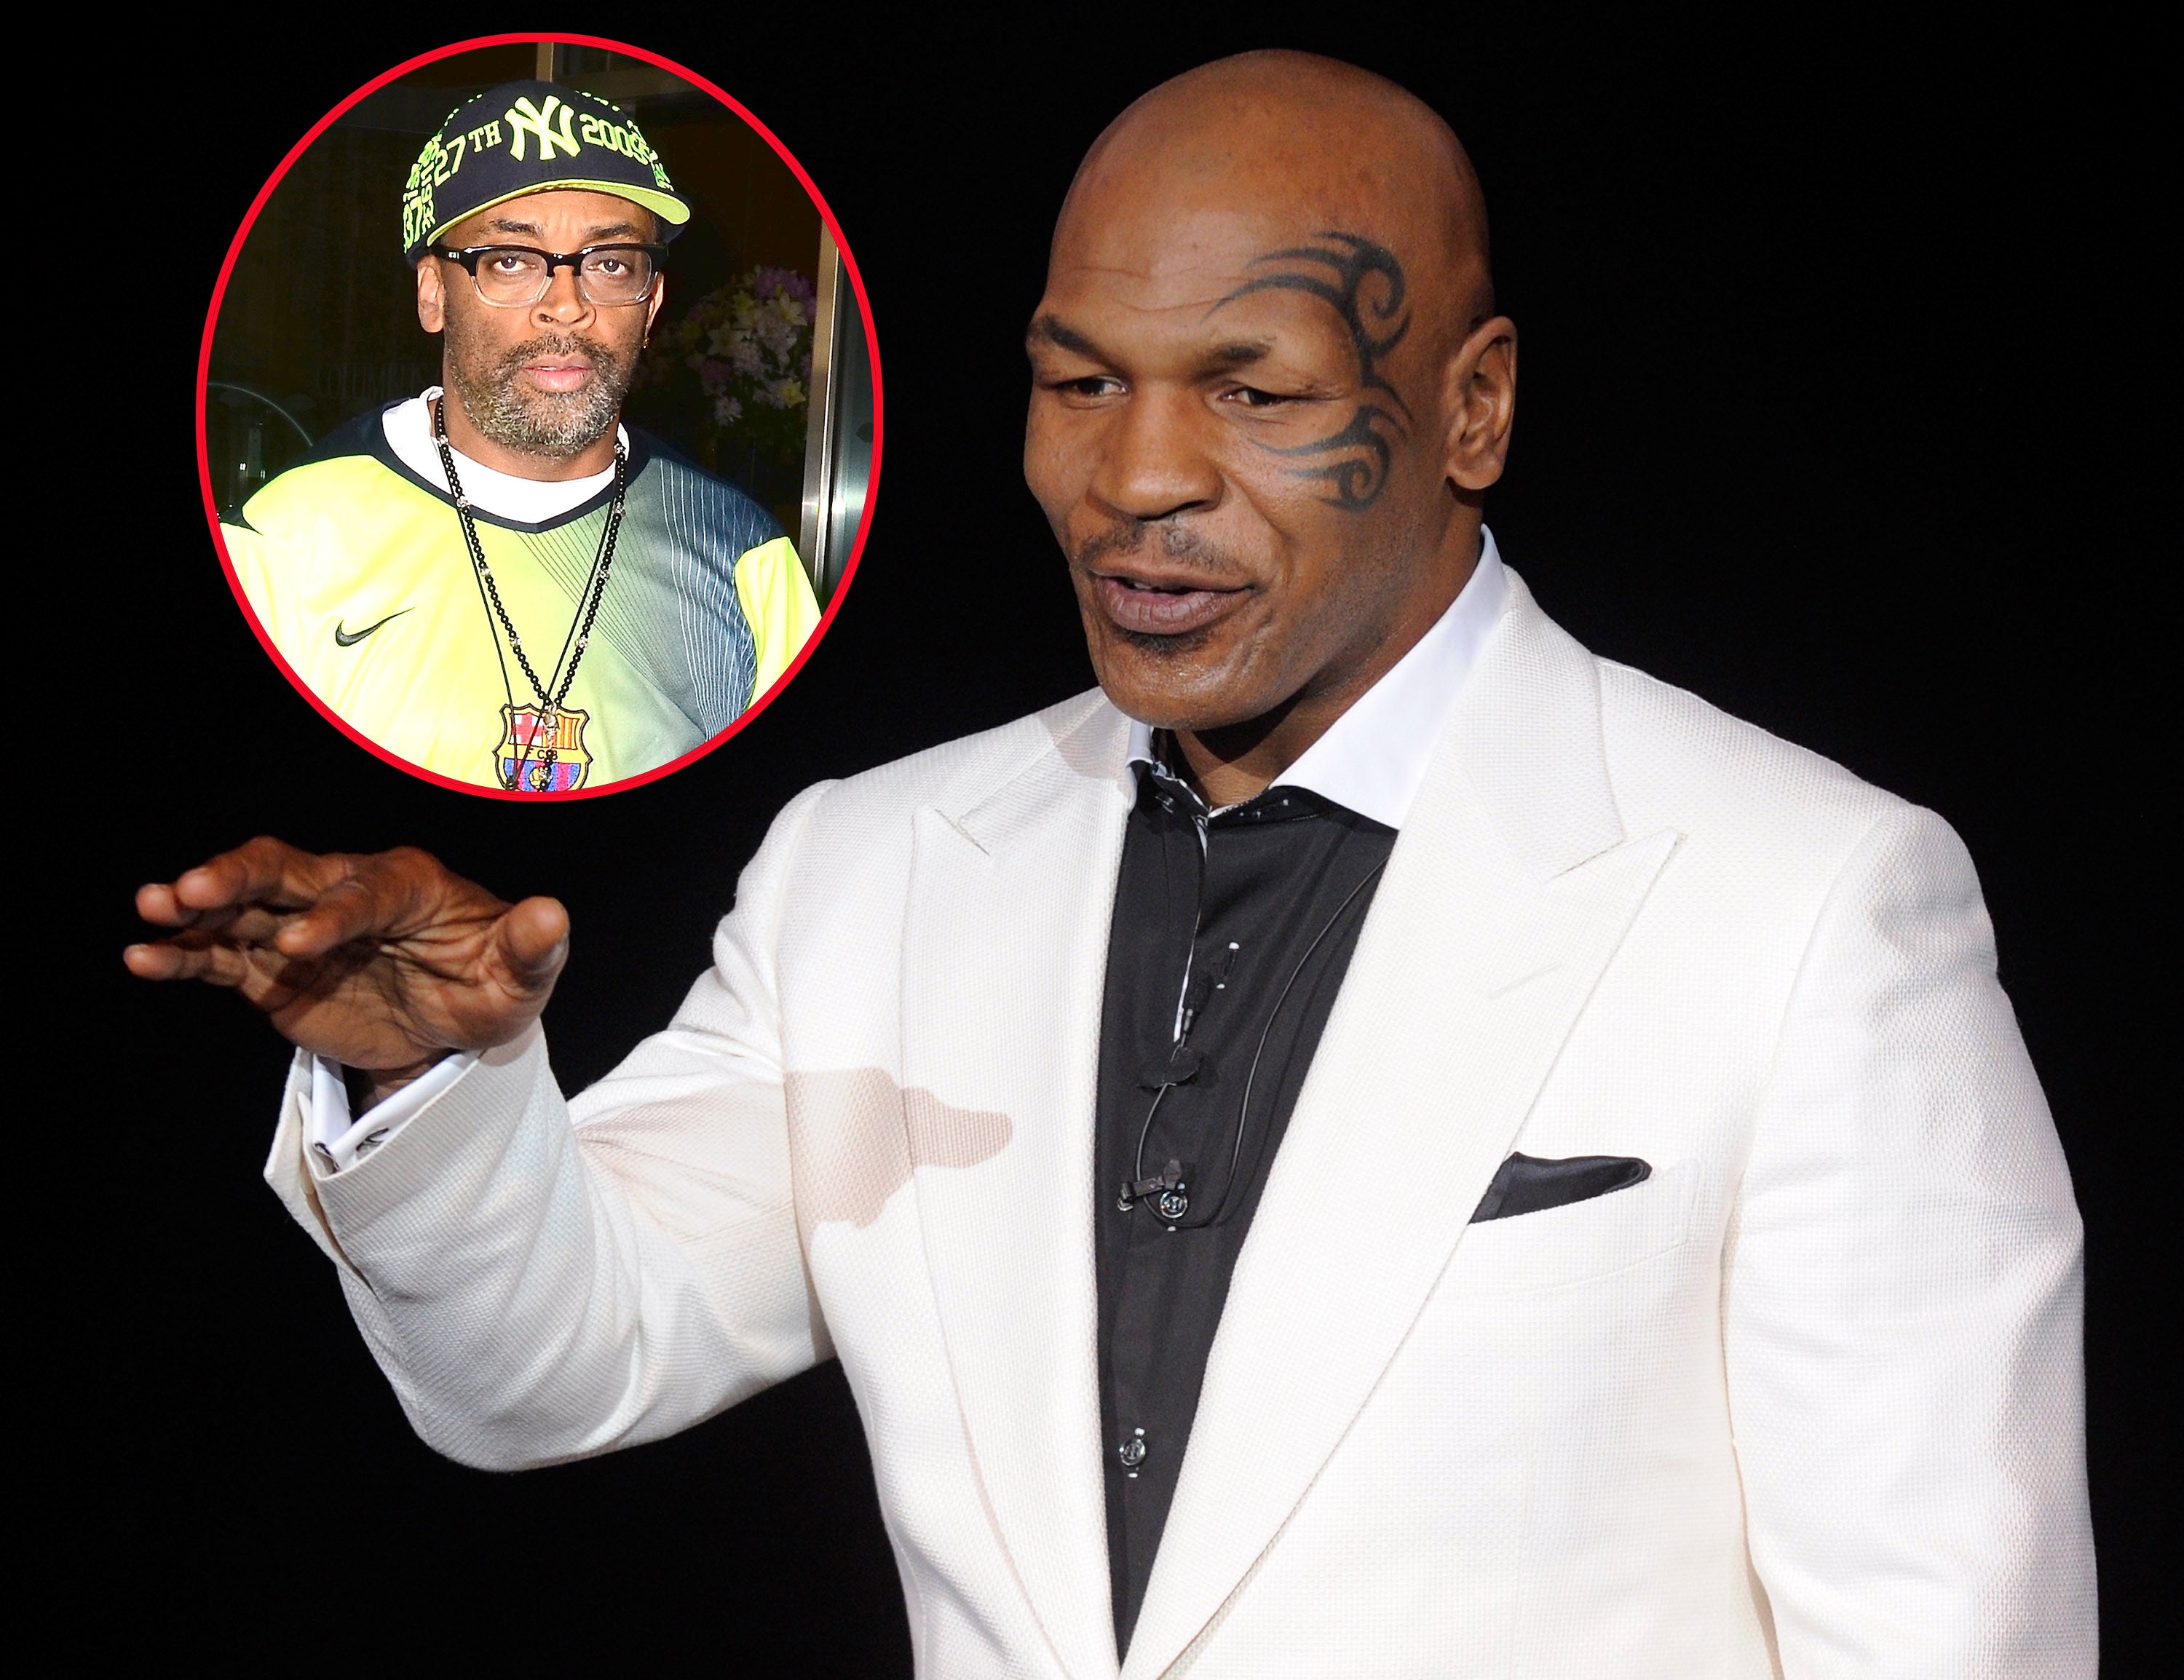 Spike Lee to Direct Mike Tyson's Broadway Play